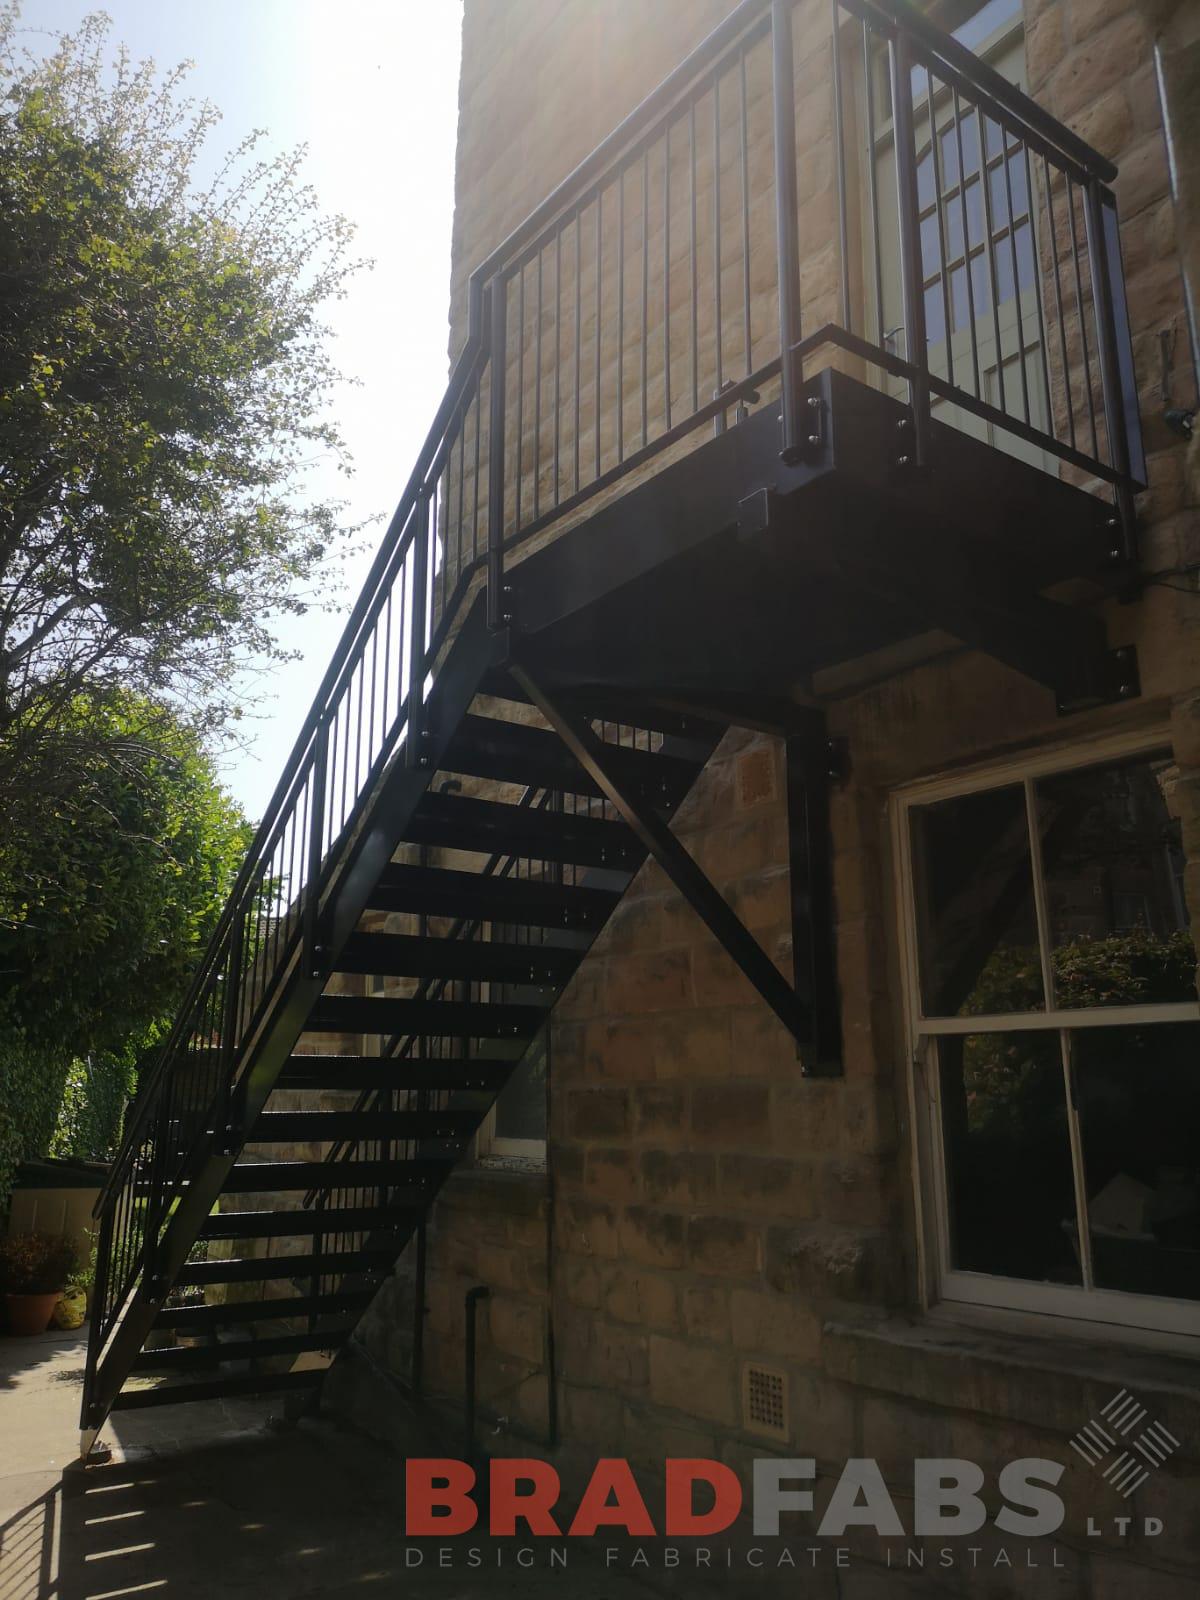 Mild steel, galvanised and powder coated fire escape with vertical bar balustrade and durbar treads by Bradfabs 